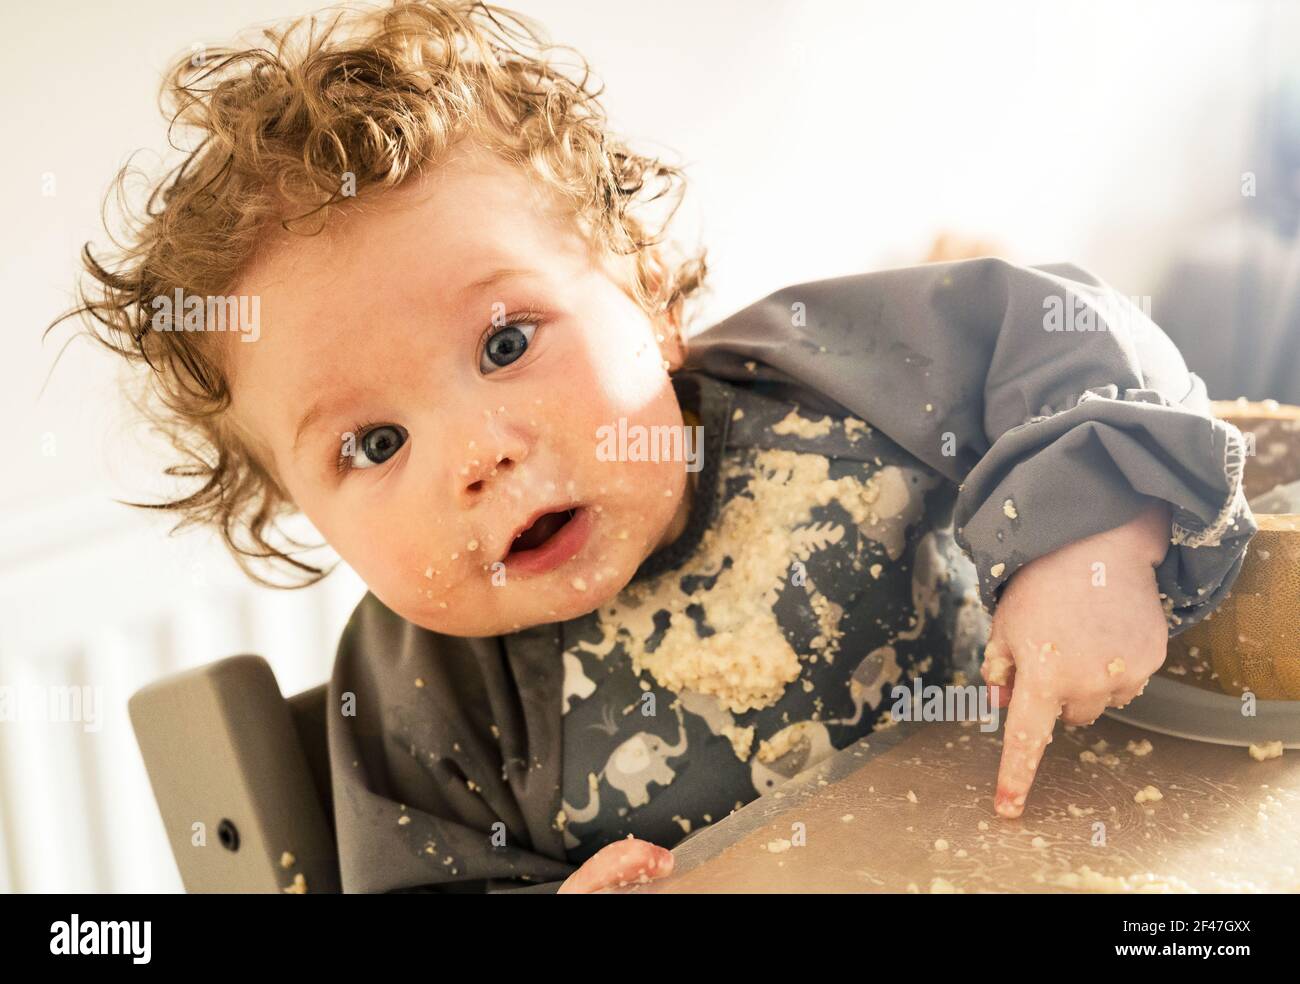 Young Baby Weaning Stock Photo